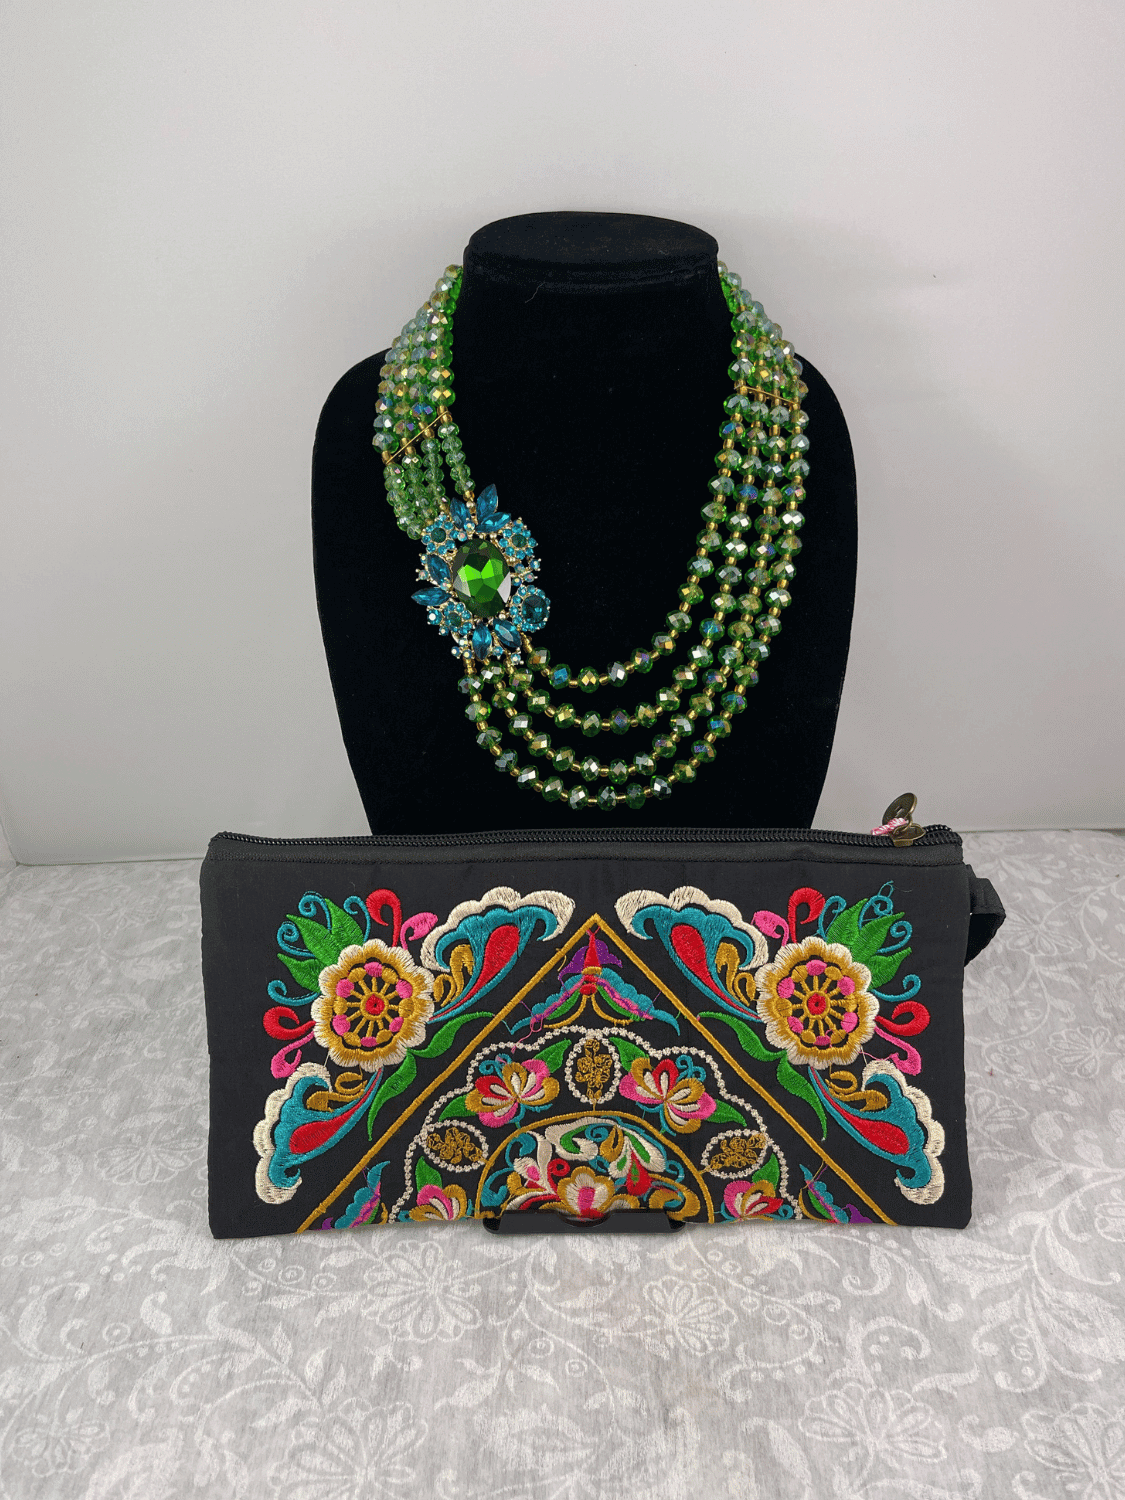 statement necklace, fashion necklace, bold necklace, chunky jewelry, Embroidered Clutch, clutch bag gift, evening bag, party clutch, bridesmaid gift, christmas jewelry, green necklace, beaded necklace, brooch necklace